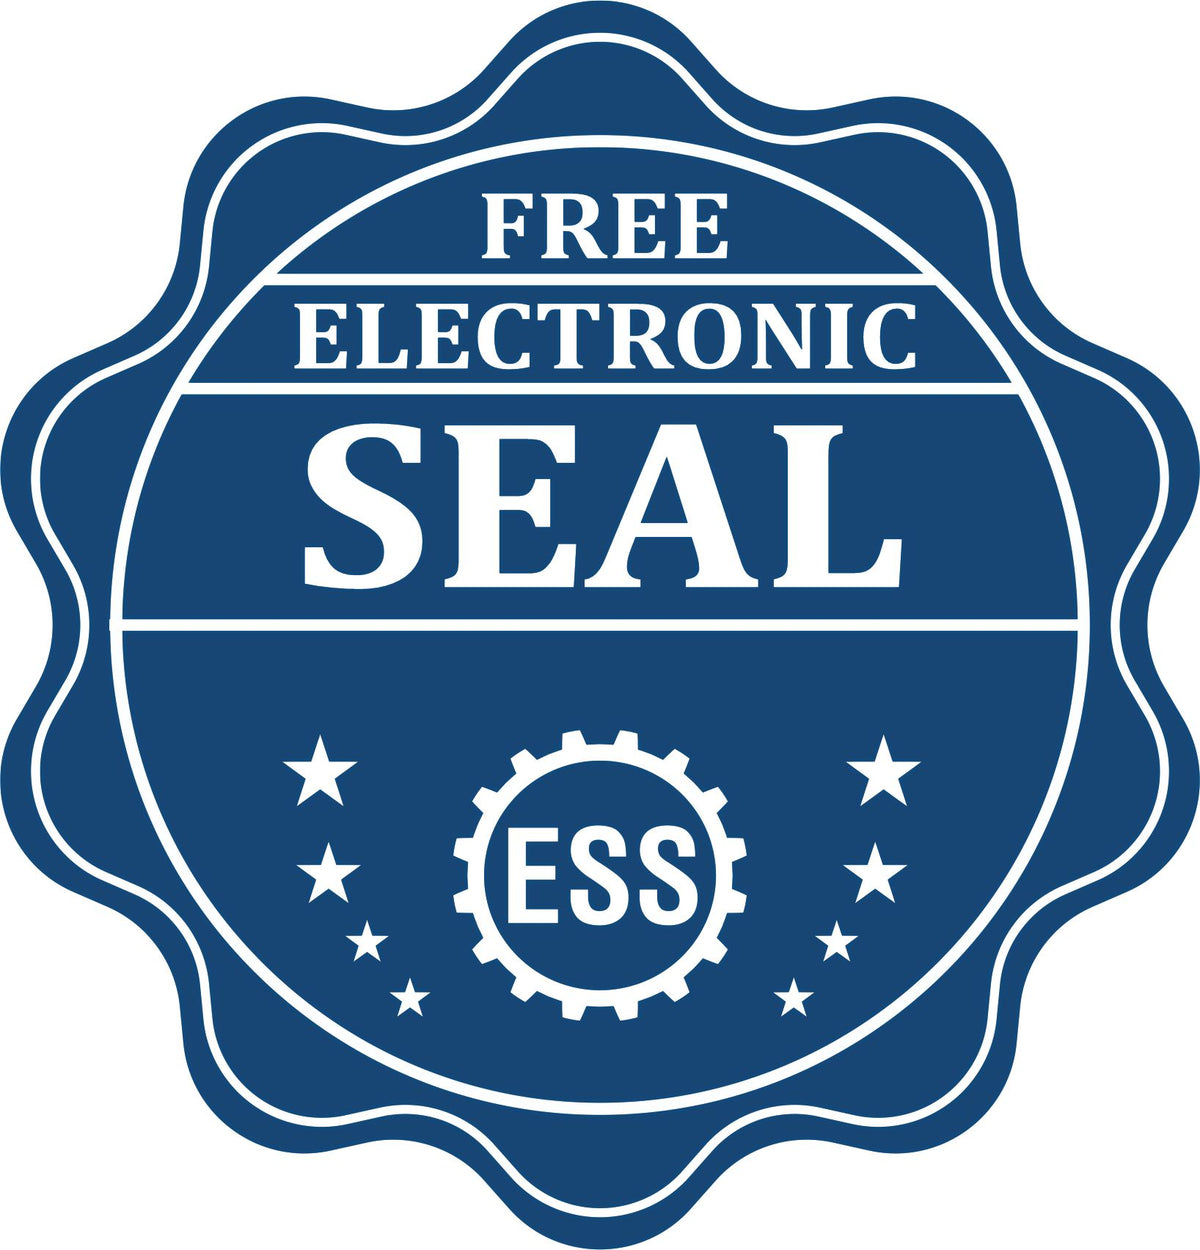 A badge showing a free electronic seal for the Premium MaxLight Pre-Inked Missouri Engineering Stamp with stars and the ESS gear on the emblem.